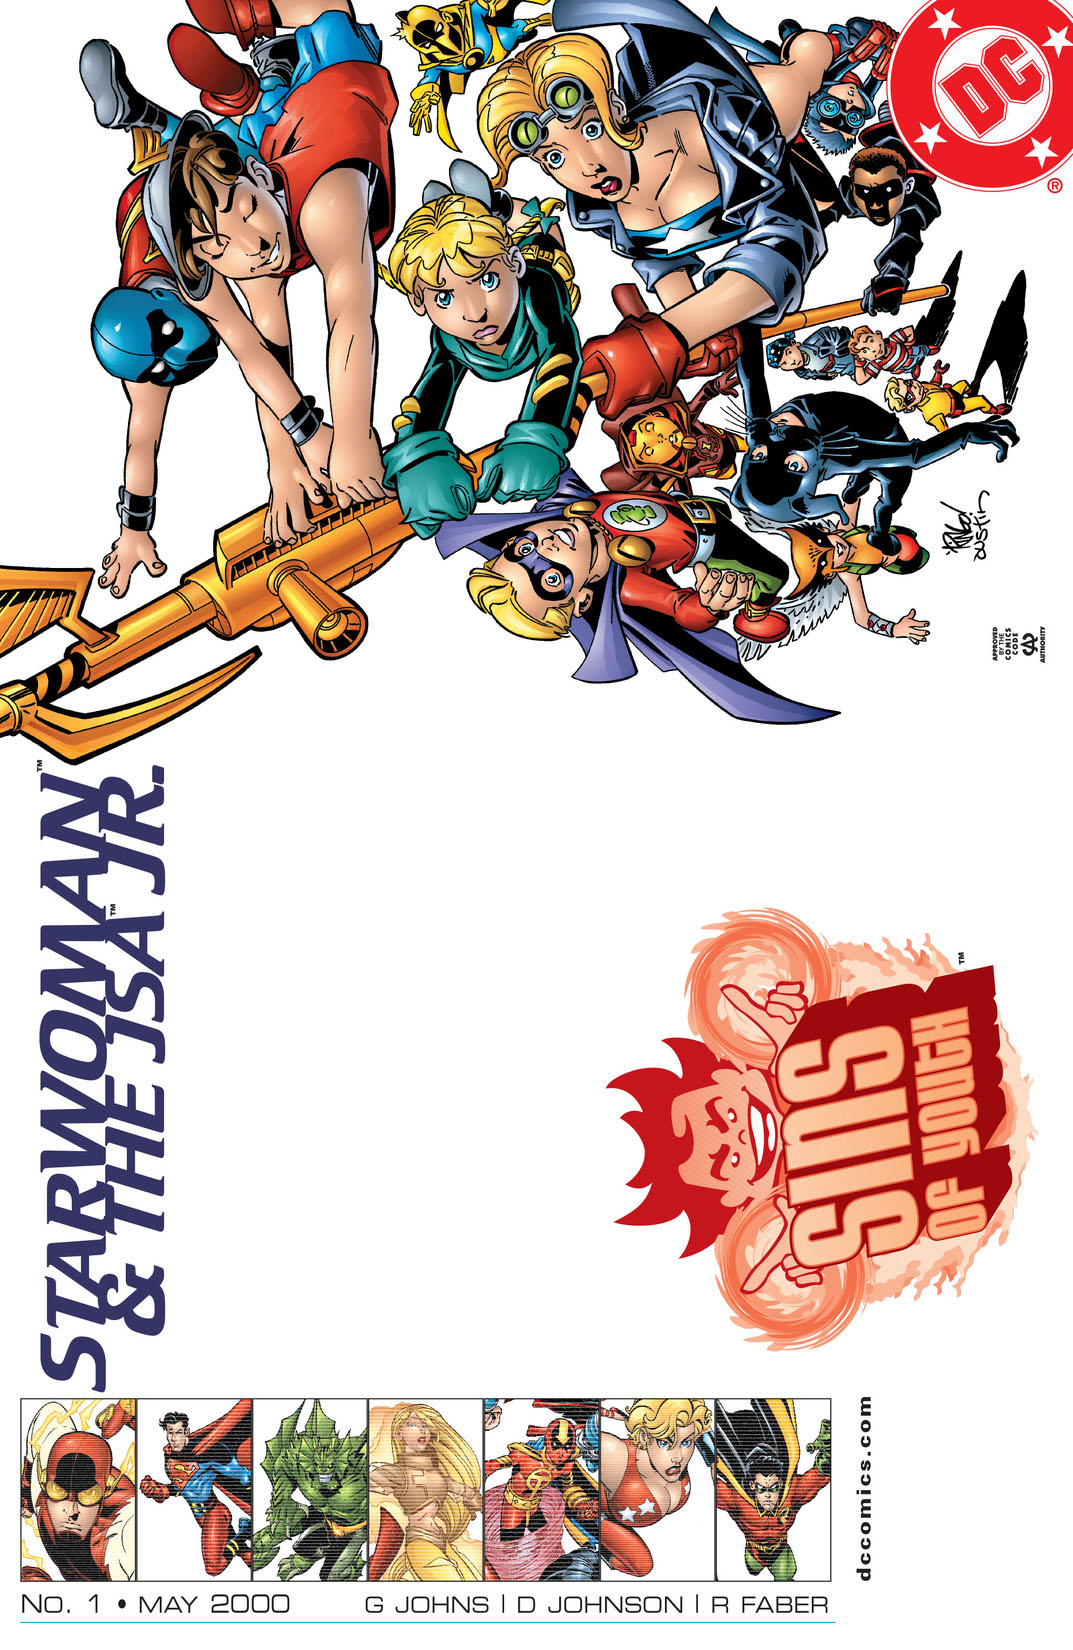 Sins of Youth: Starwoman and the JSA (Junior Society of America) #1 preview images